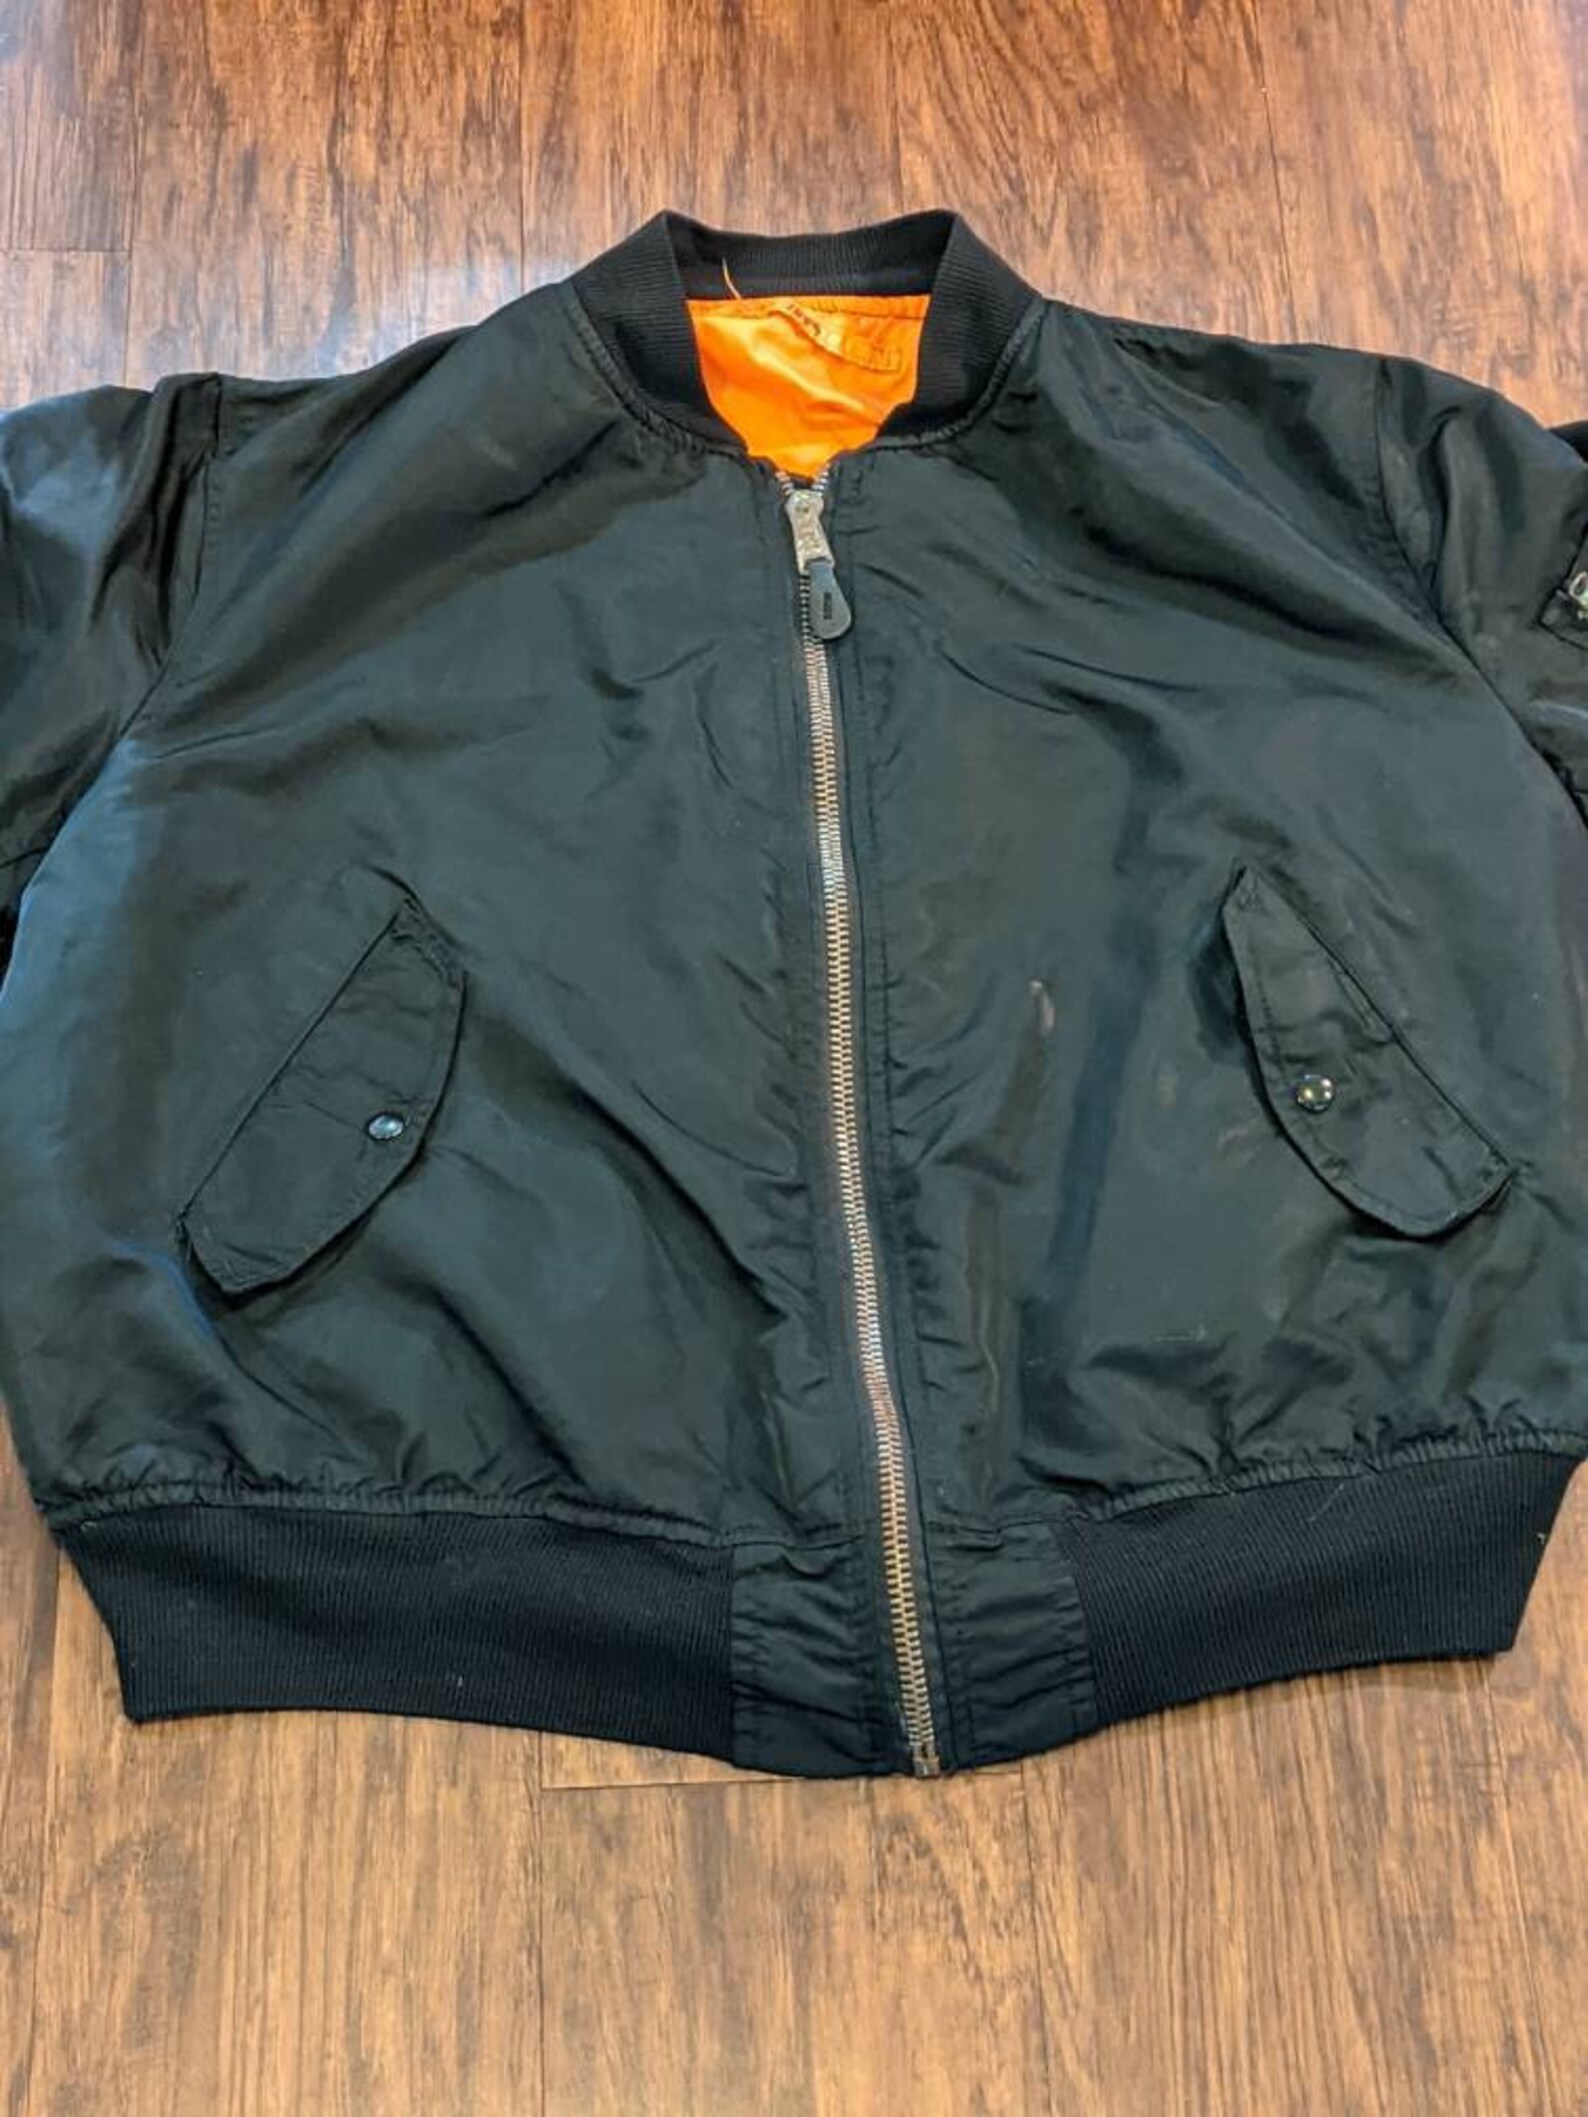 Alpha Industries USAF MA-1 Jacket Made in USA | Etsy